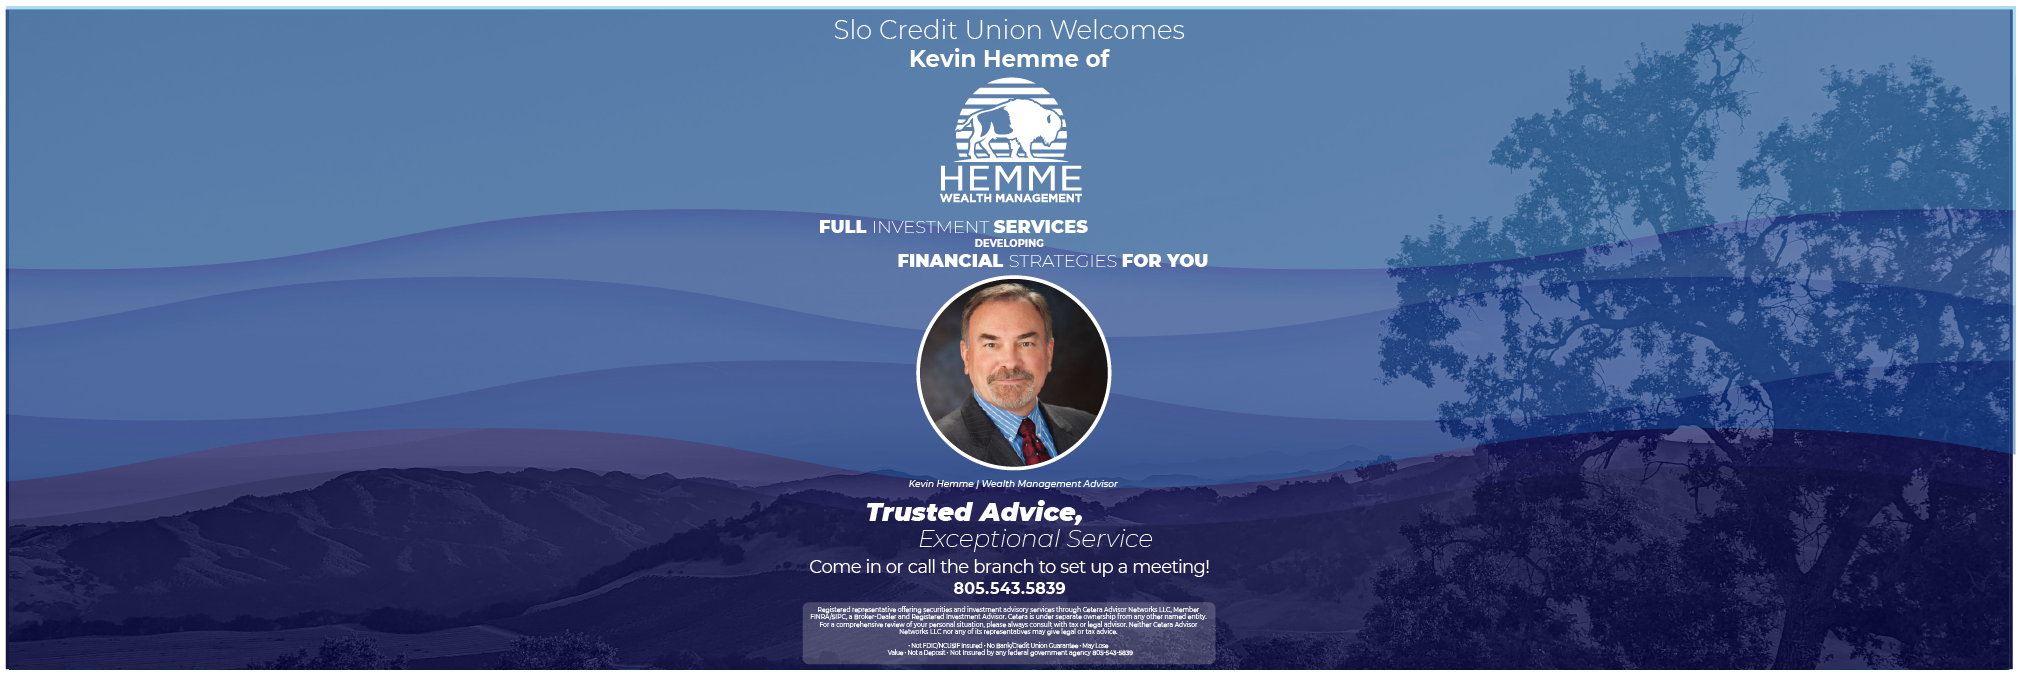 Trusted Advice, Exceptional ServiceKevin Hemme | Wealth Management AdvisorRegistered representative offering securities and investment advisory services through Cetera Advisor Networks LLC, Member FINRA/SIPC, a Broker-Dealer and Registered Investment Advisor. Cetera is under separate ownership from any other named entity. For a comprehensive review of your personal situation, please always consult with tax or legal advisor. Neither Cetera Advisor Networks LLC nor any of its representatives may give legal or tax advice.

• Not FDIC/NCUSIF Insured • No Bank/Credit Union Guarantee • May Lose
   Value • Not a Deposit • Not Insured by any federal government agency 805-543-5839Slo Credit Union Welcomes
Kevin Hemme ofFULL INVESTMENT SERVICESCome in or call the branch to set up a meeting!805.543.5839FINANCIAL STRATEGIES FOR YOUDEVELOPING